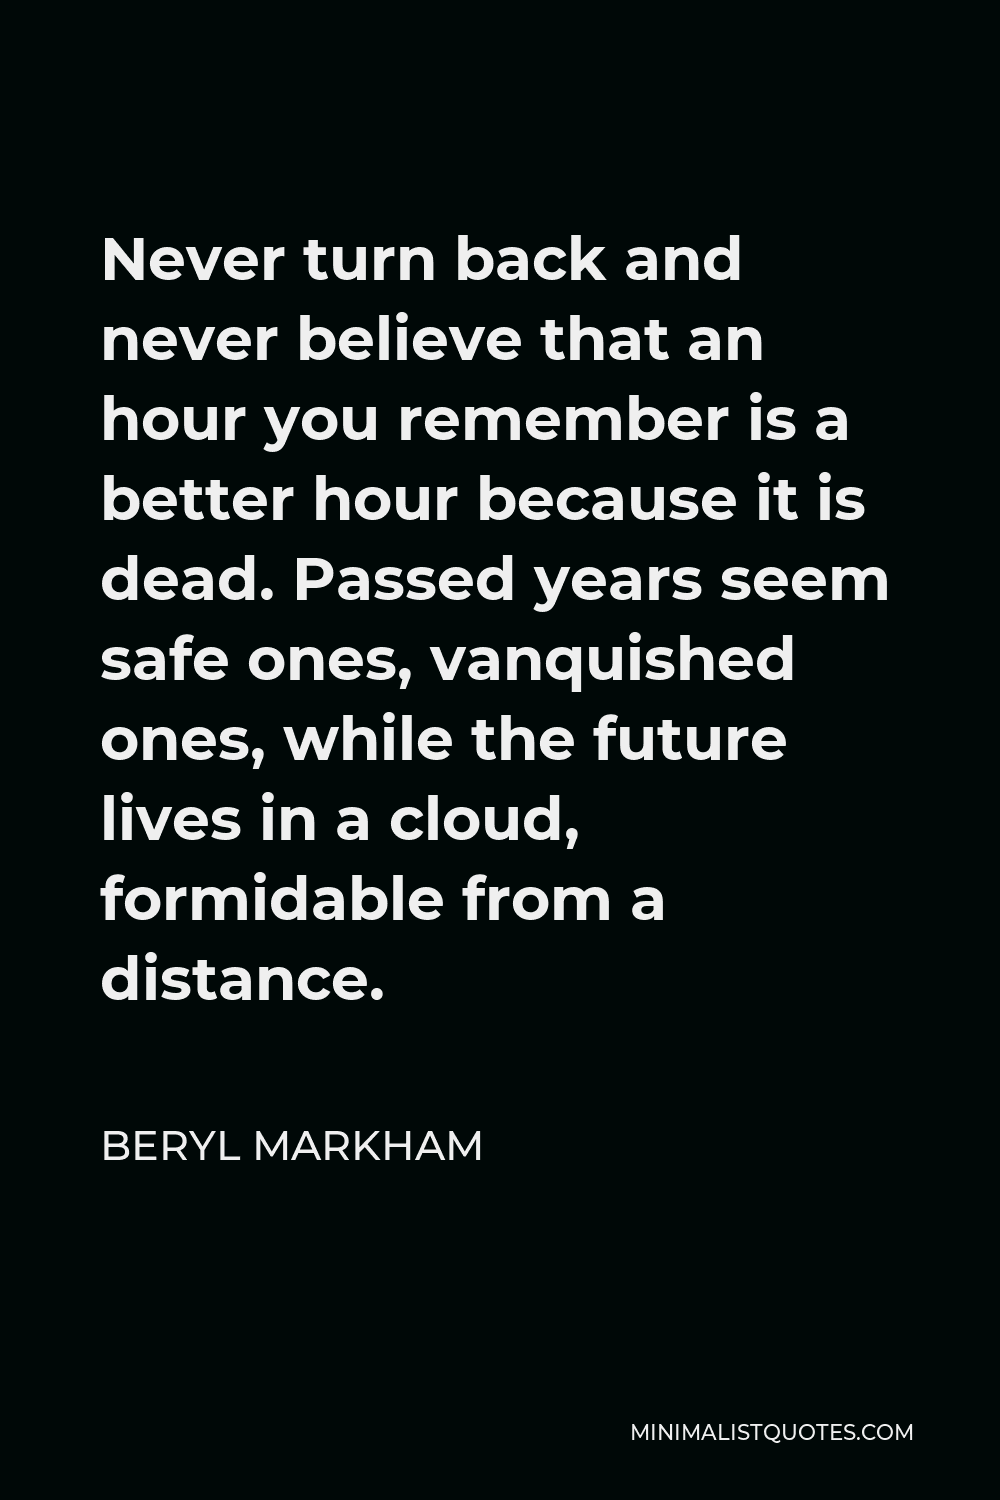 Beryl Markham Quote - Never turn back and never believe that an hour you remember is a better hour because it is dead. Passed years seem safe ones, vanquished ones, while the future lives in a cloud, formidable from a distance.